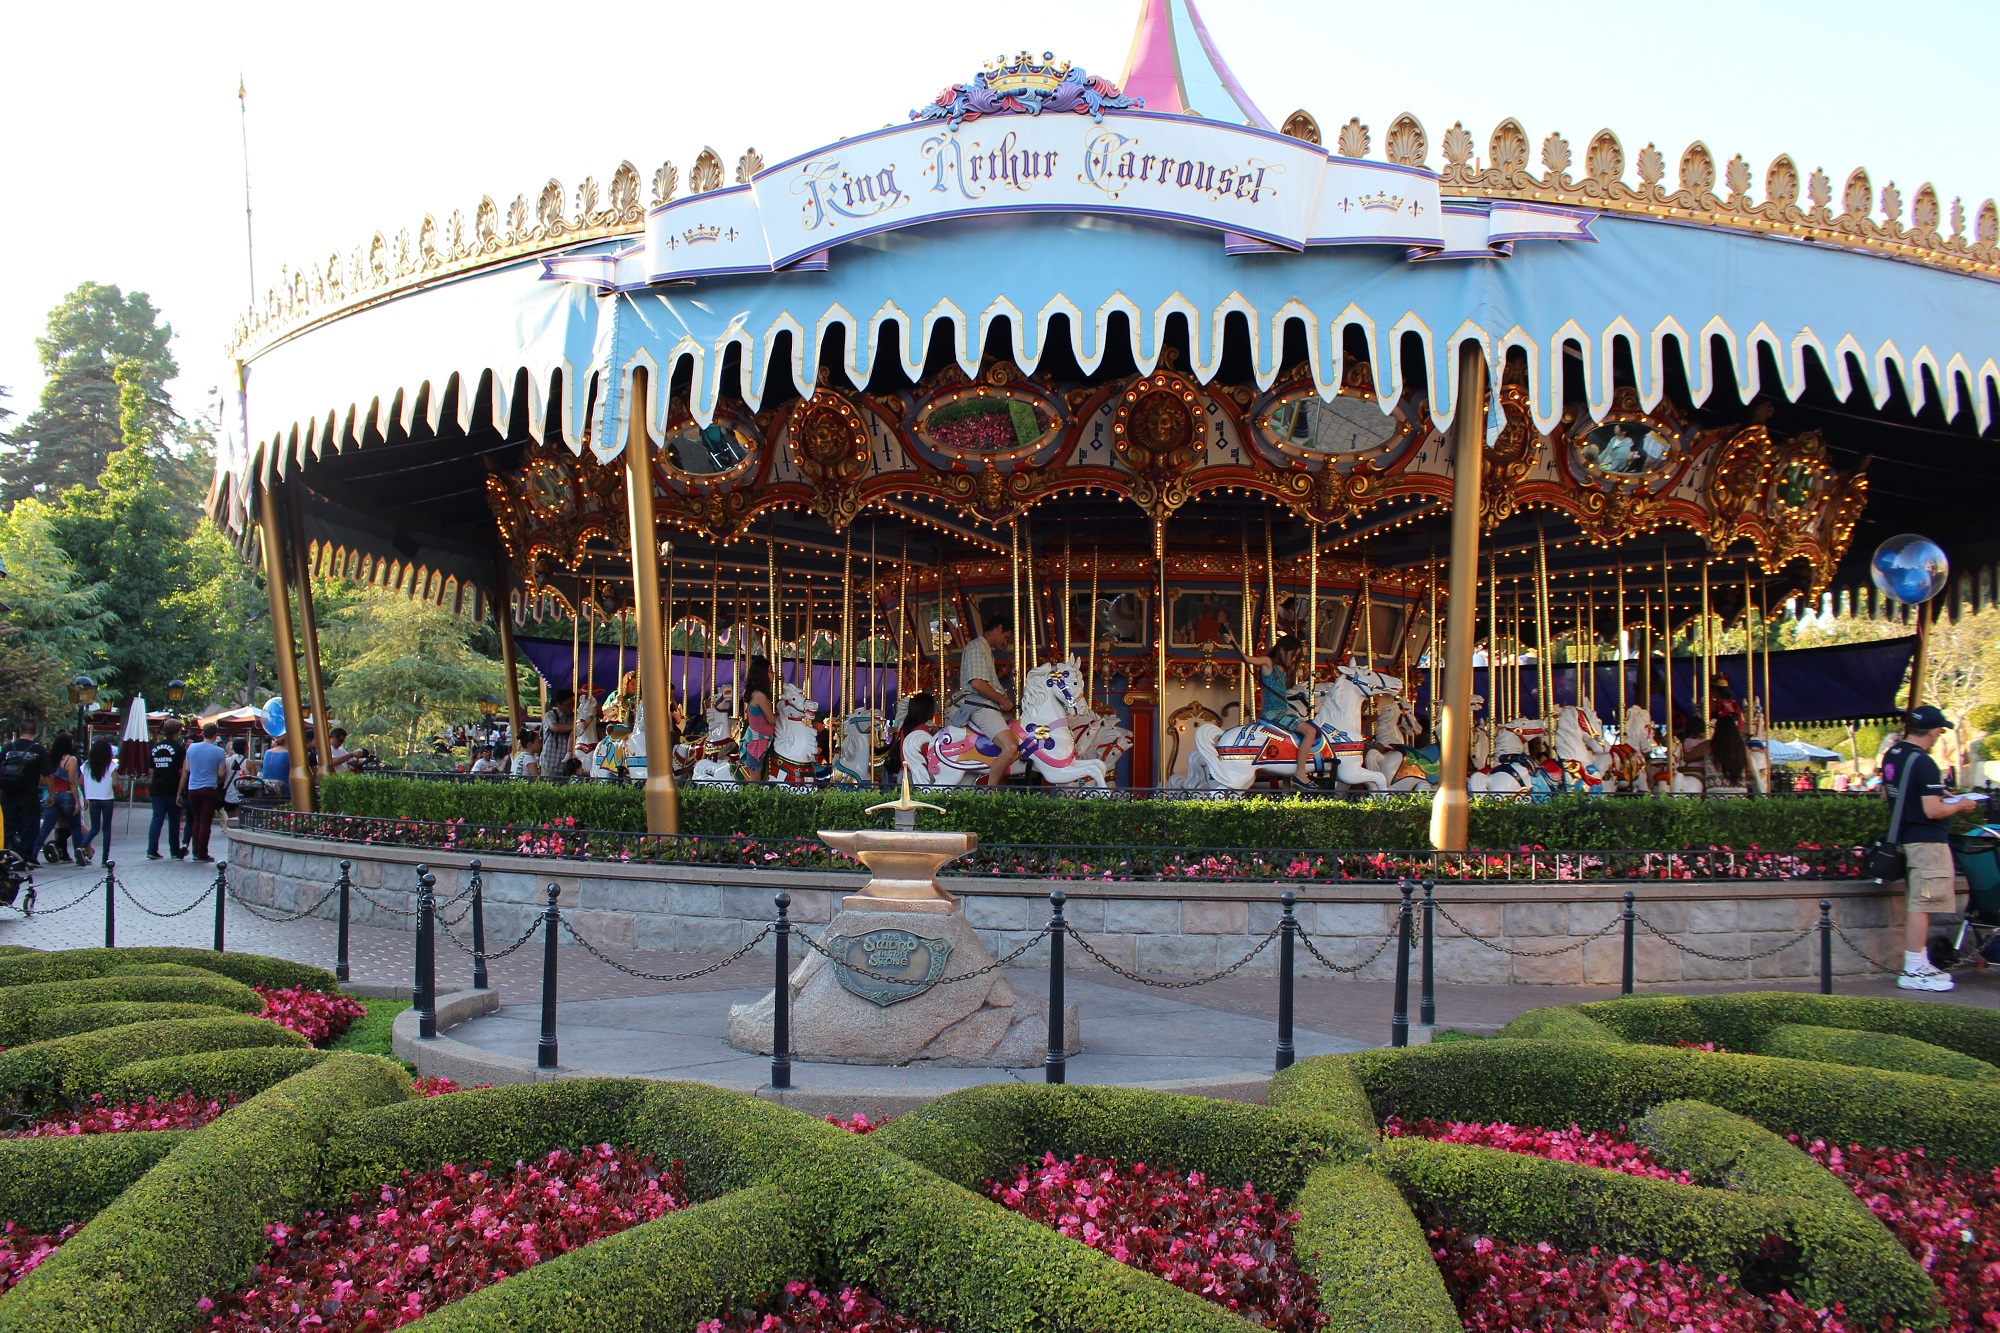 Explore the rides that make your head spin at Disneyland |PassPorter.com